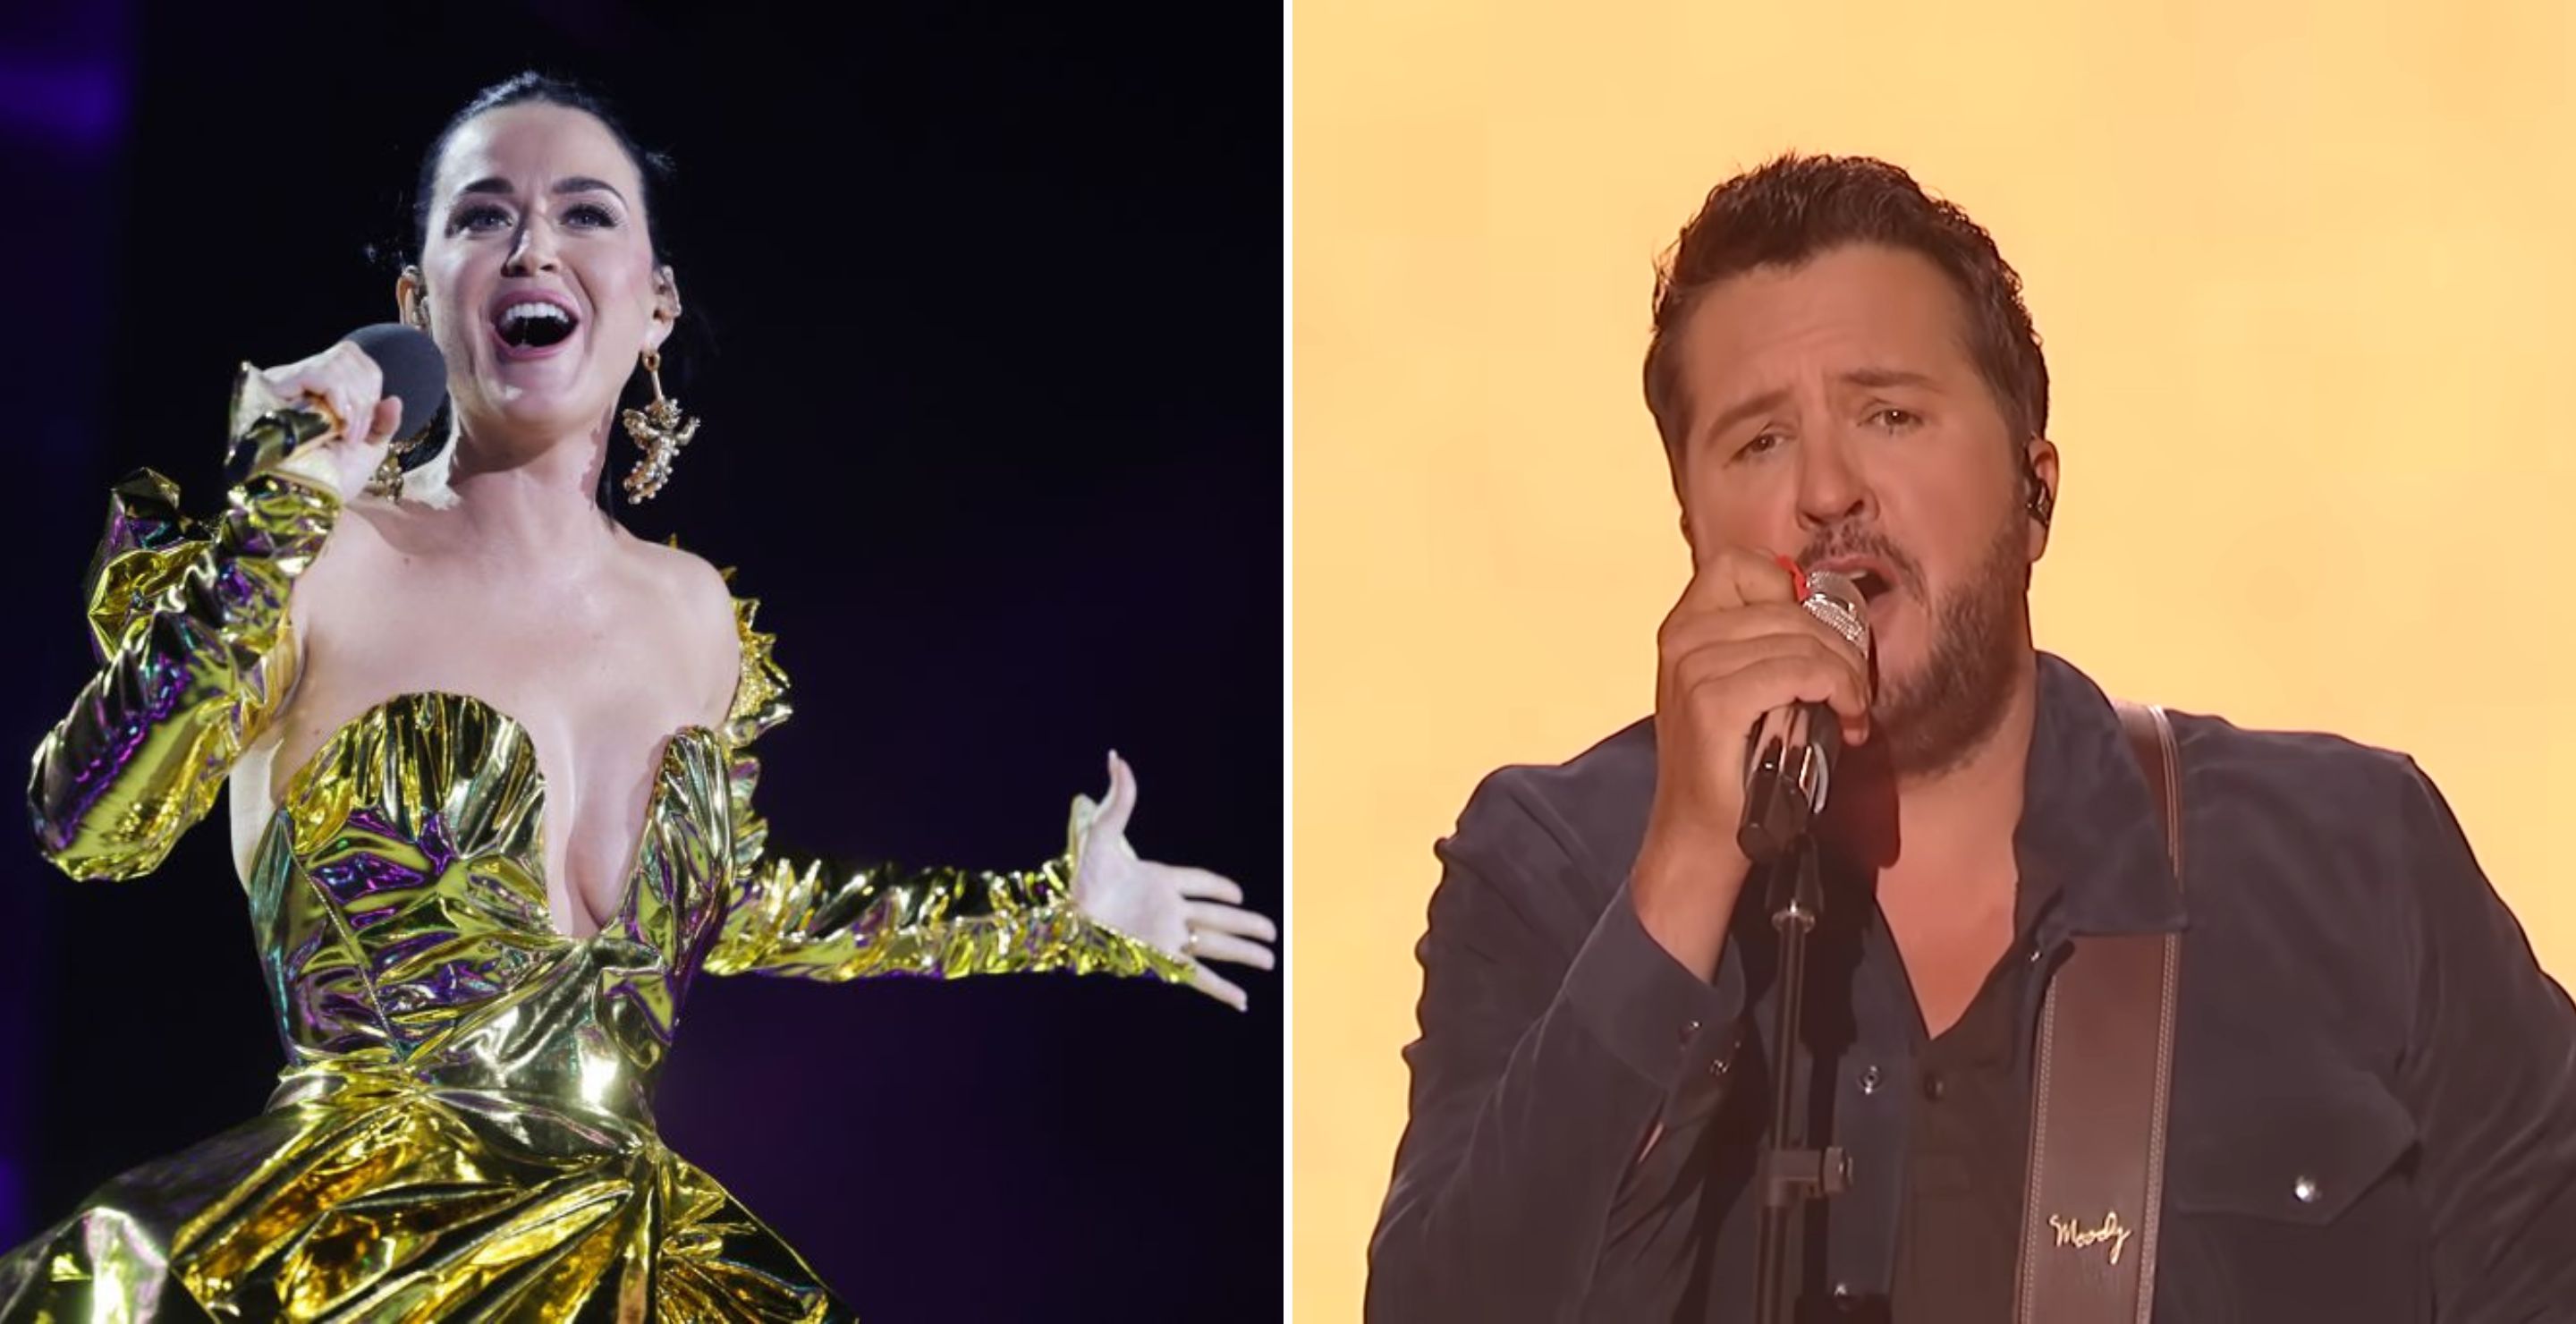 Katy Perry Has A Special Celebration With Luke Bryan Prepared For Her American Idol Sendoff